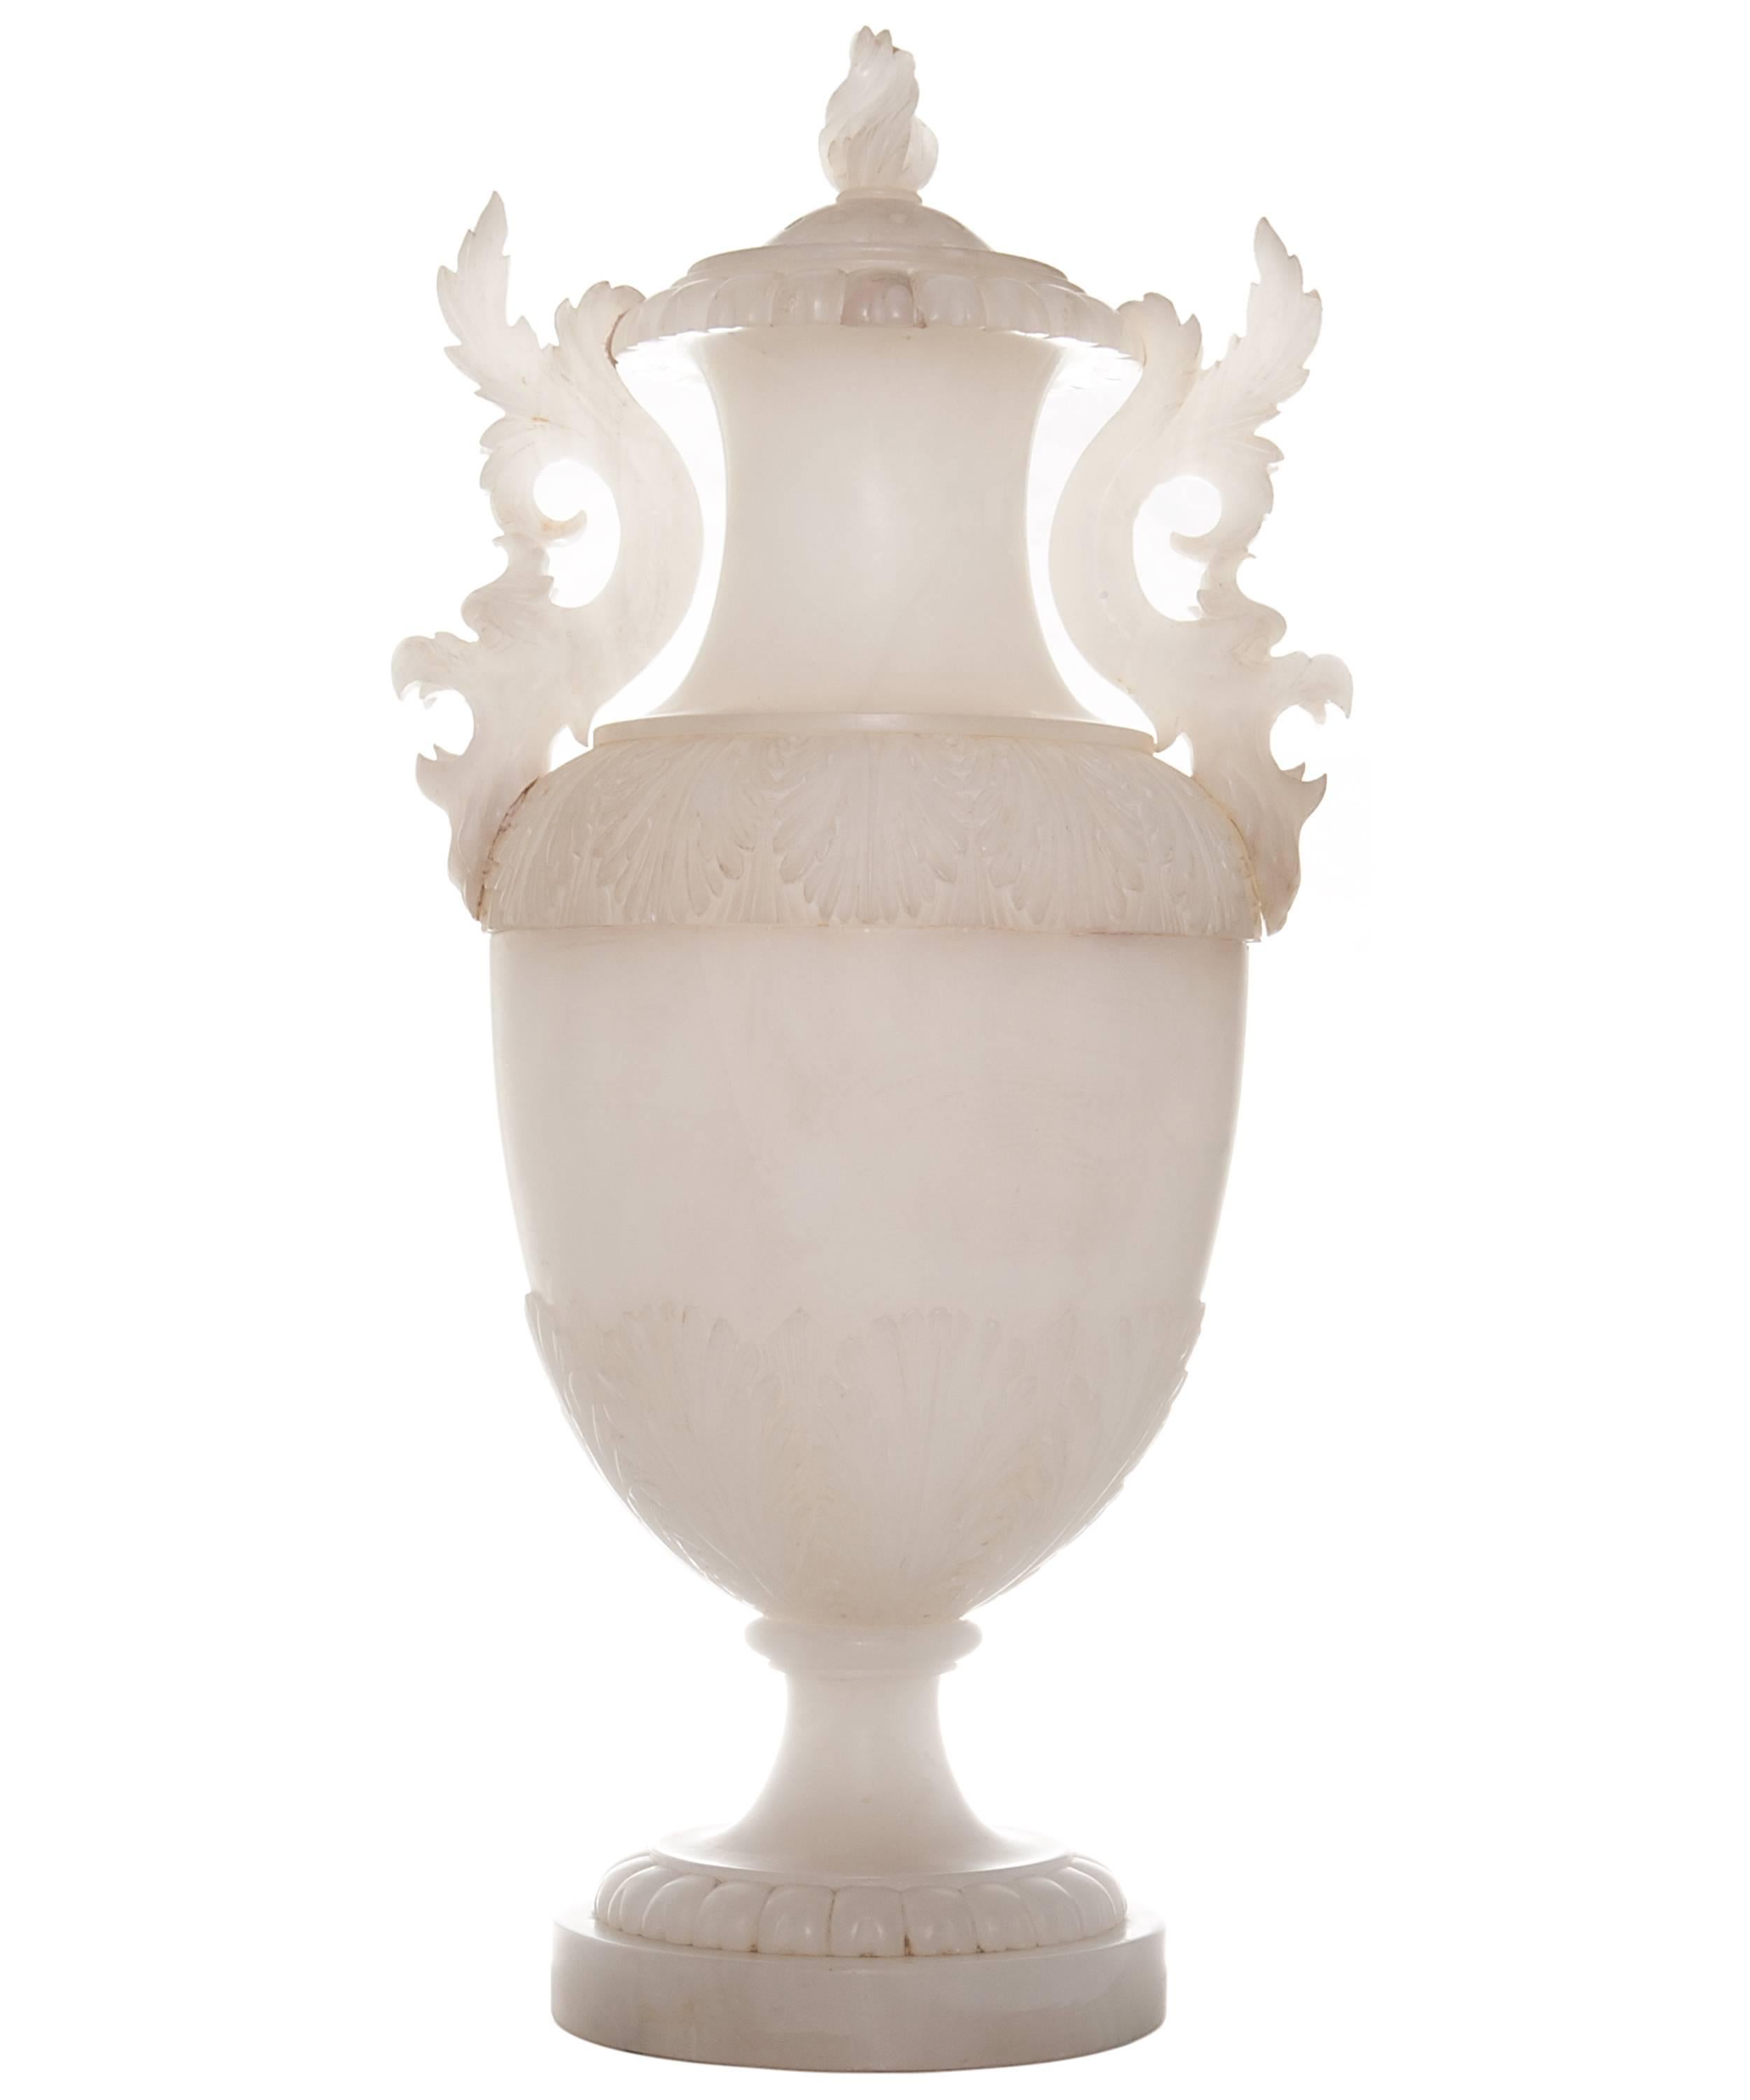 With hand-carved floral design
Two scroll carved handles in dragon form
Perforated lids
These vases are hollowed and suitable for converting into lamps.